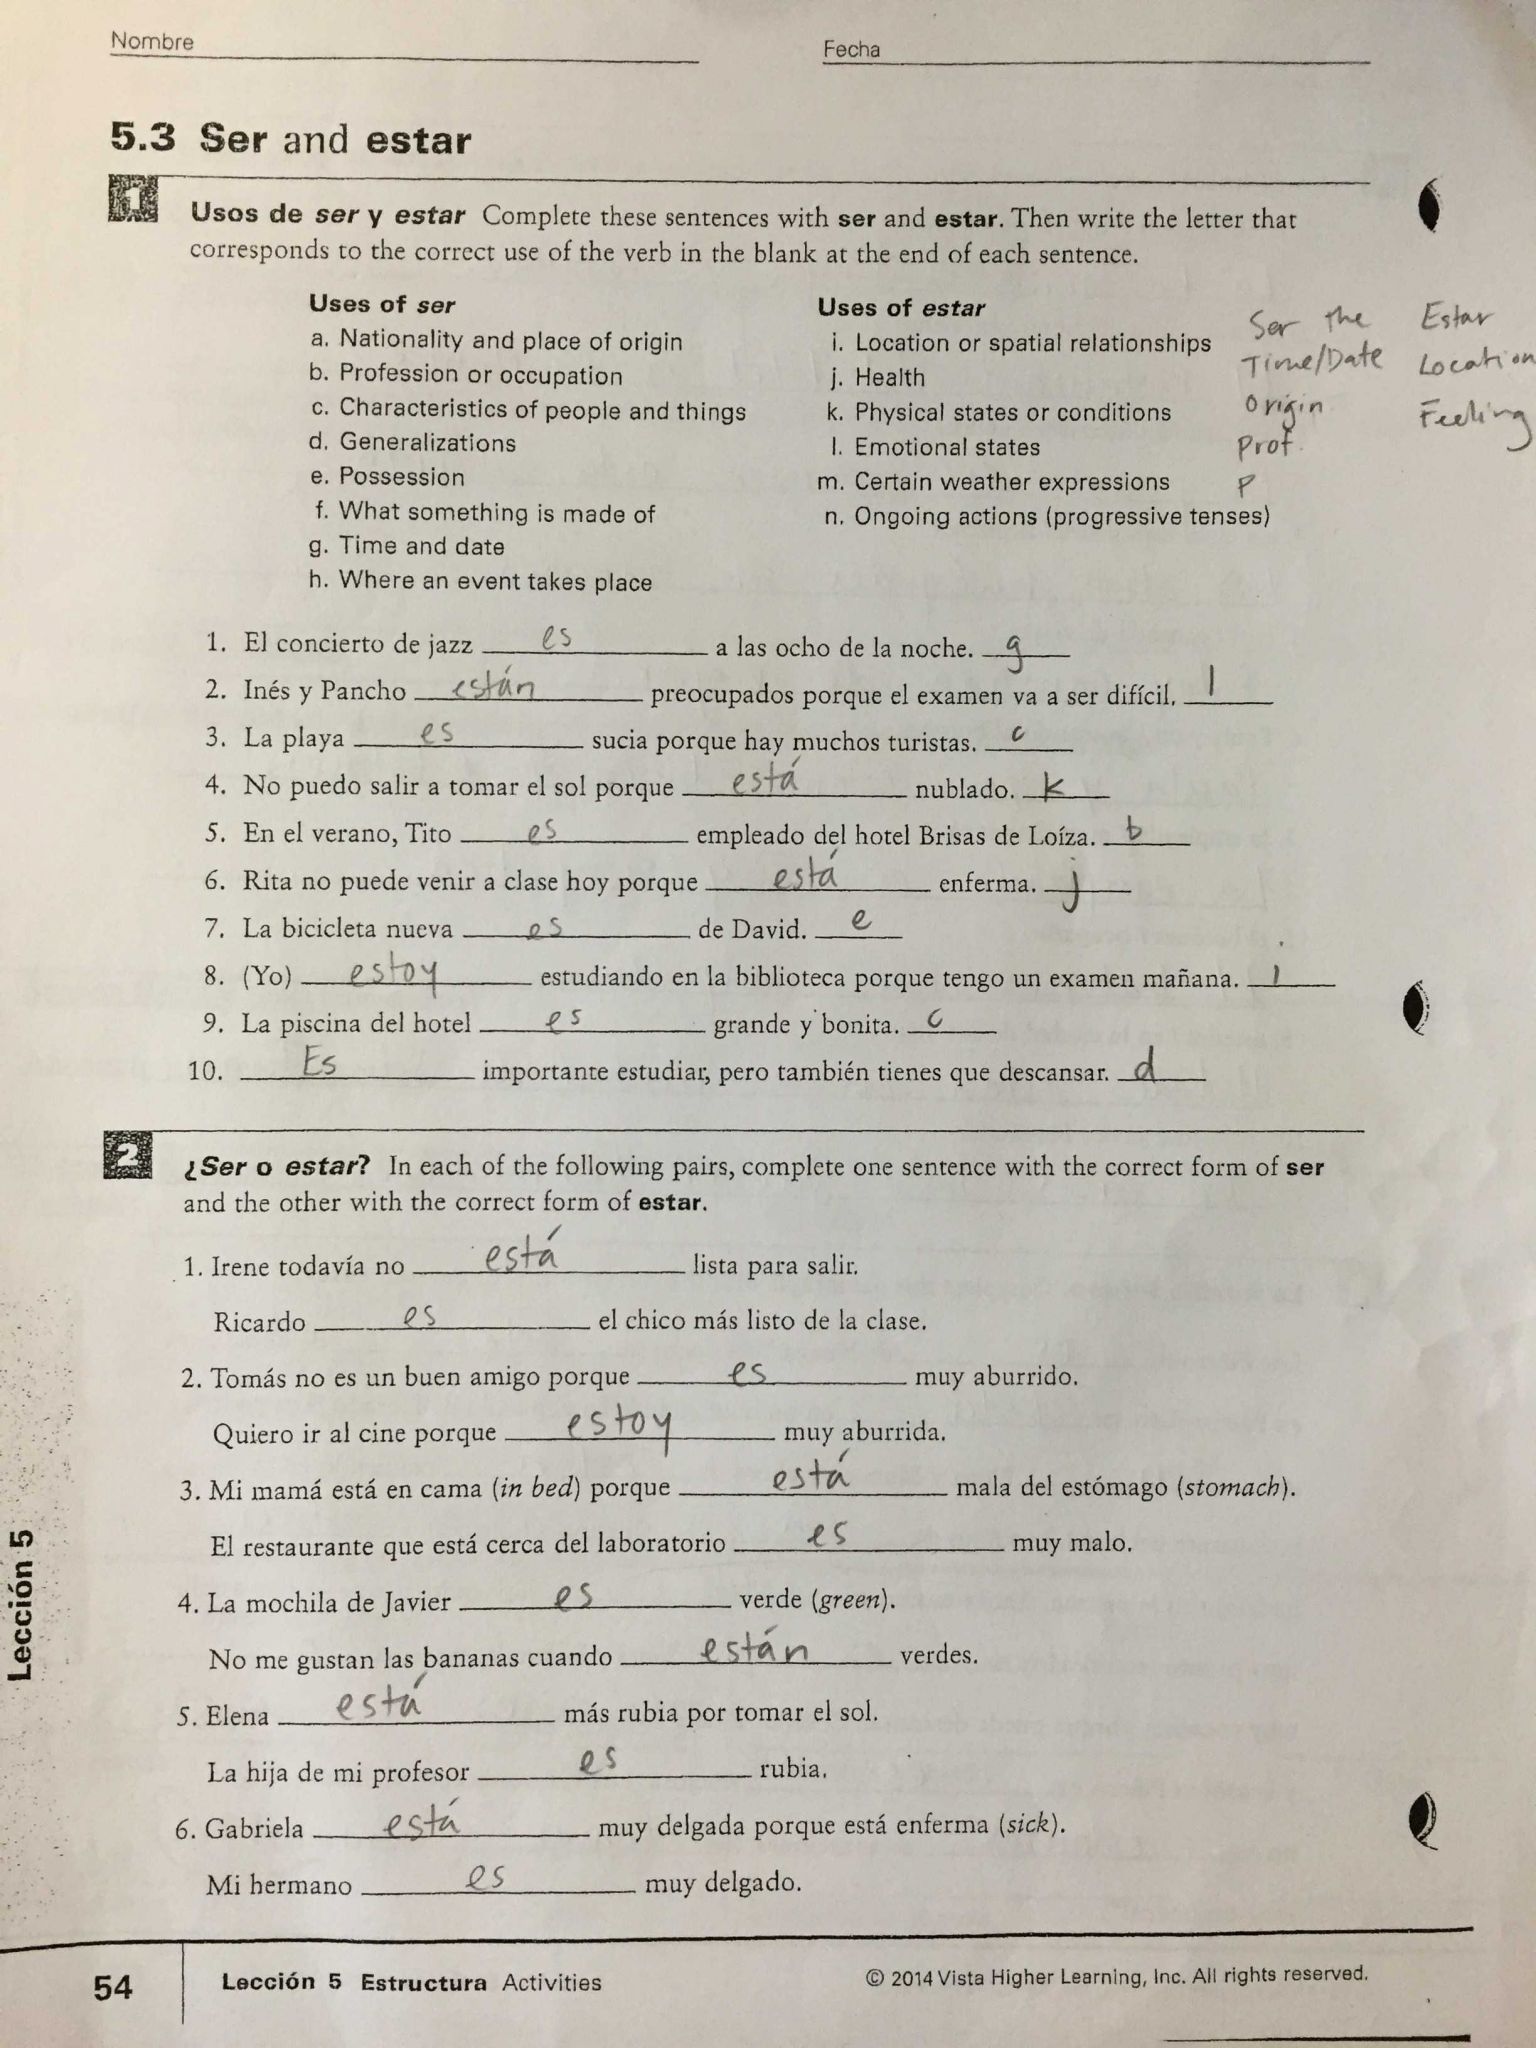 Food Inc Worksheet Answer Key with 20 Unique Food Inc Worksheet Answer Key